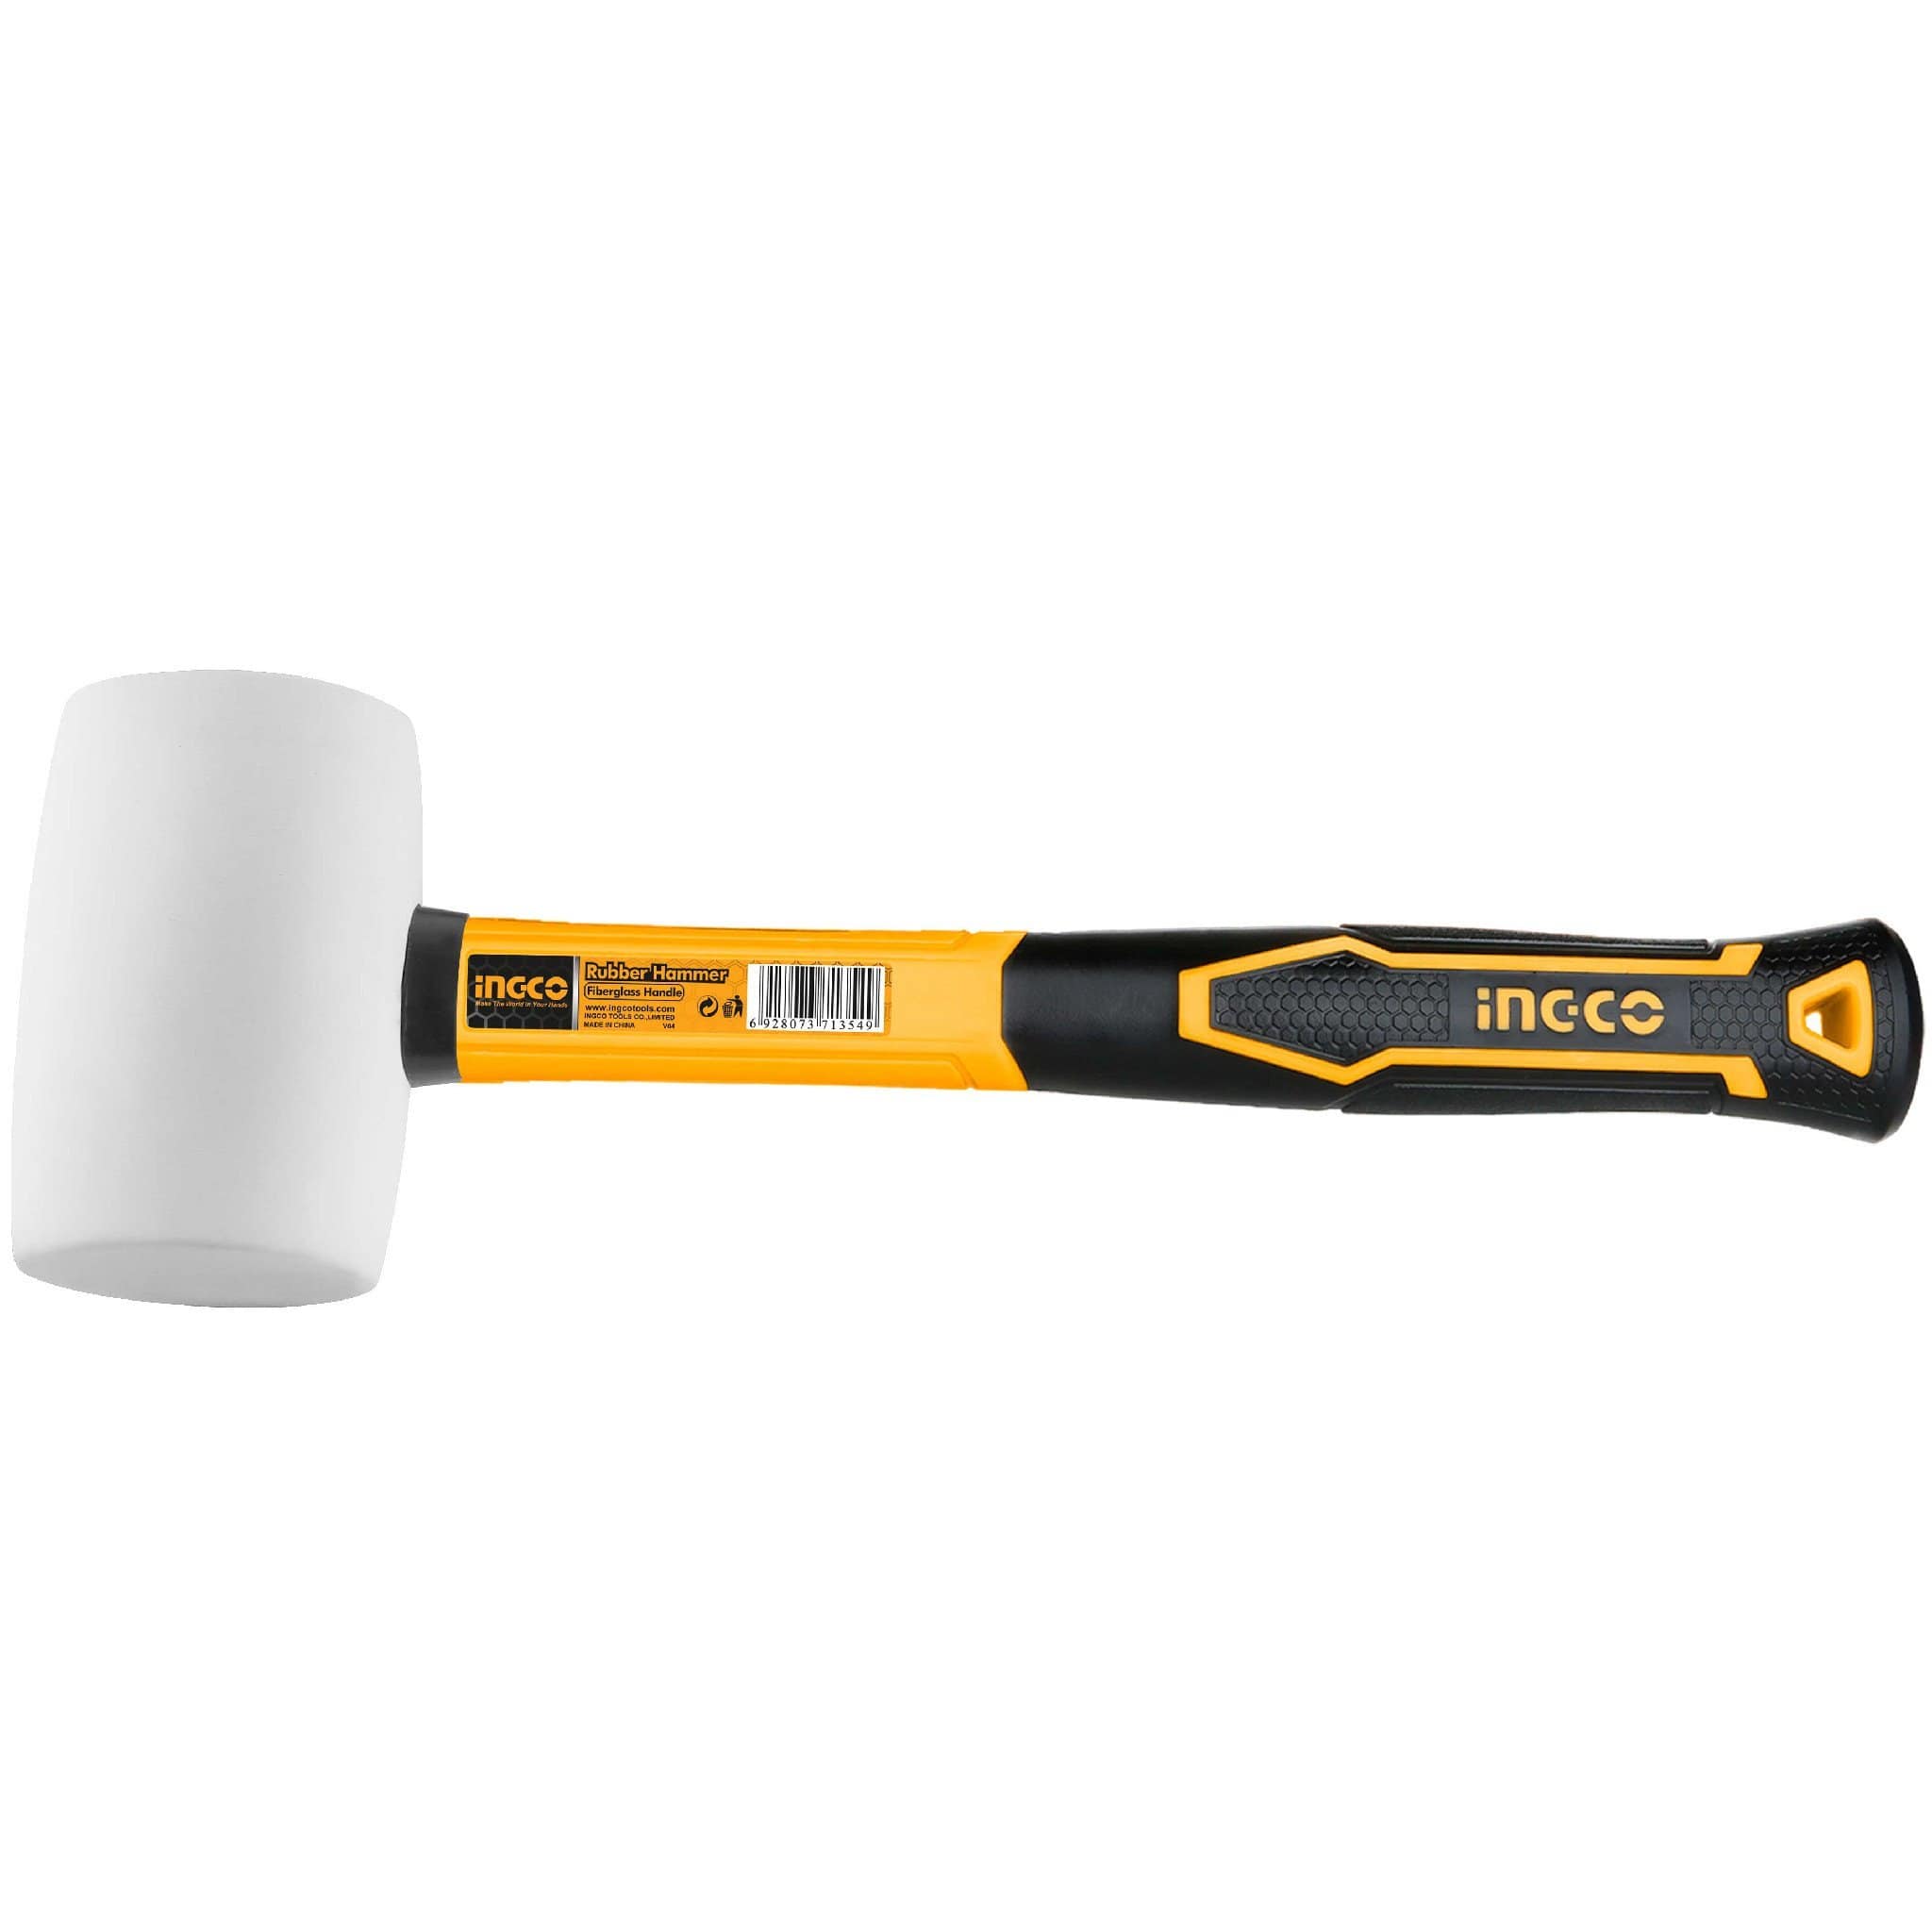 Ingco Rubber Hammer Soft Type With Fibreglass Handle